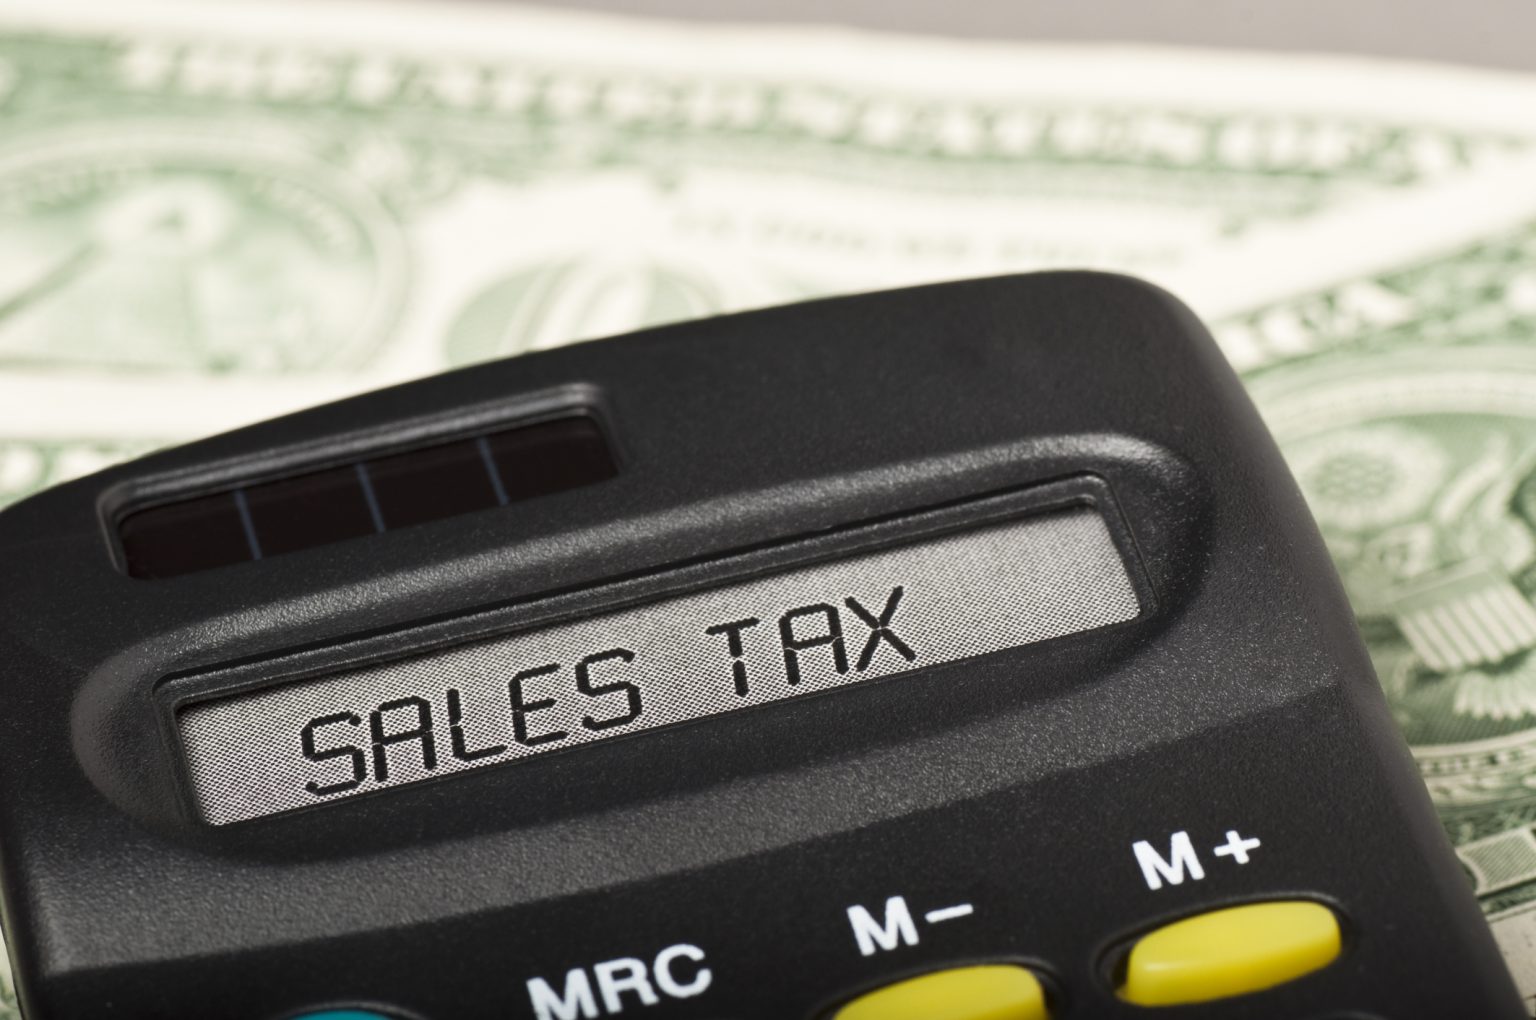 should-sales-tax-be-included-in-price